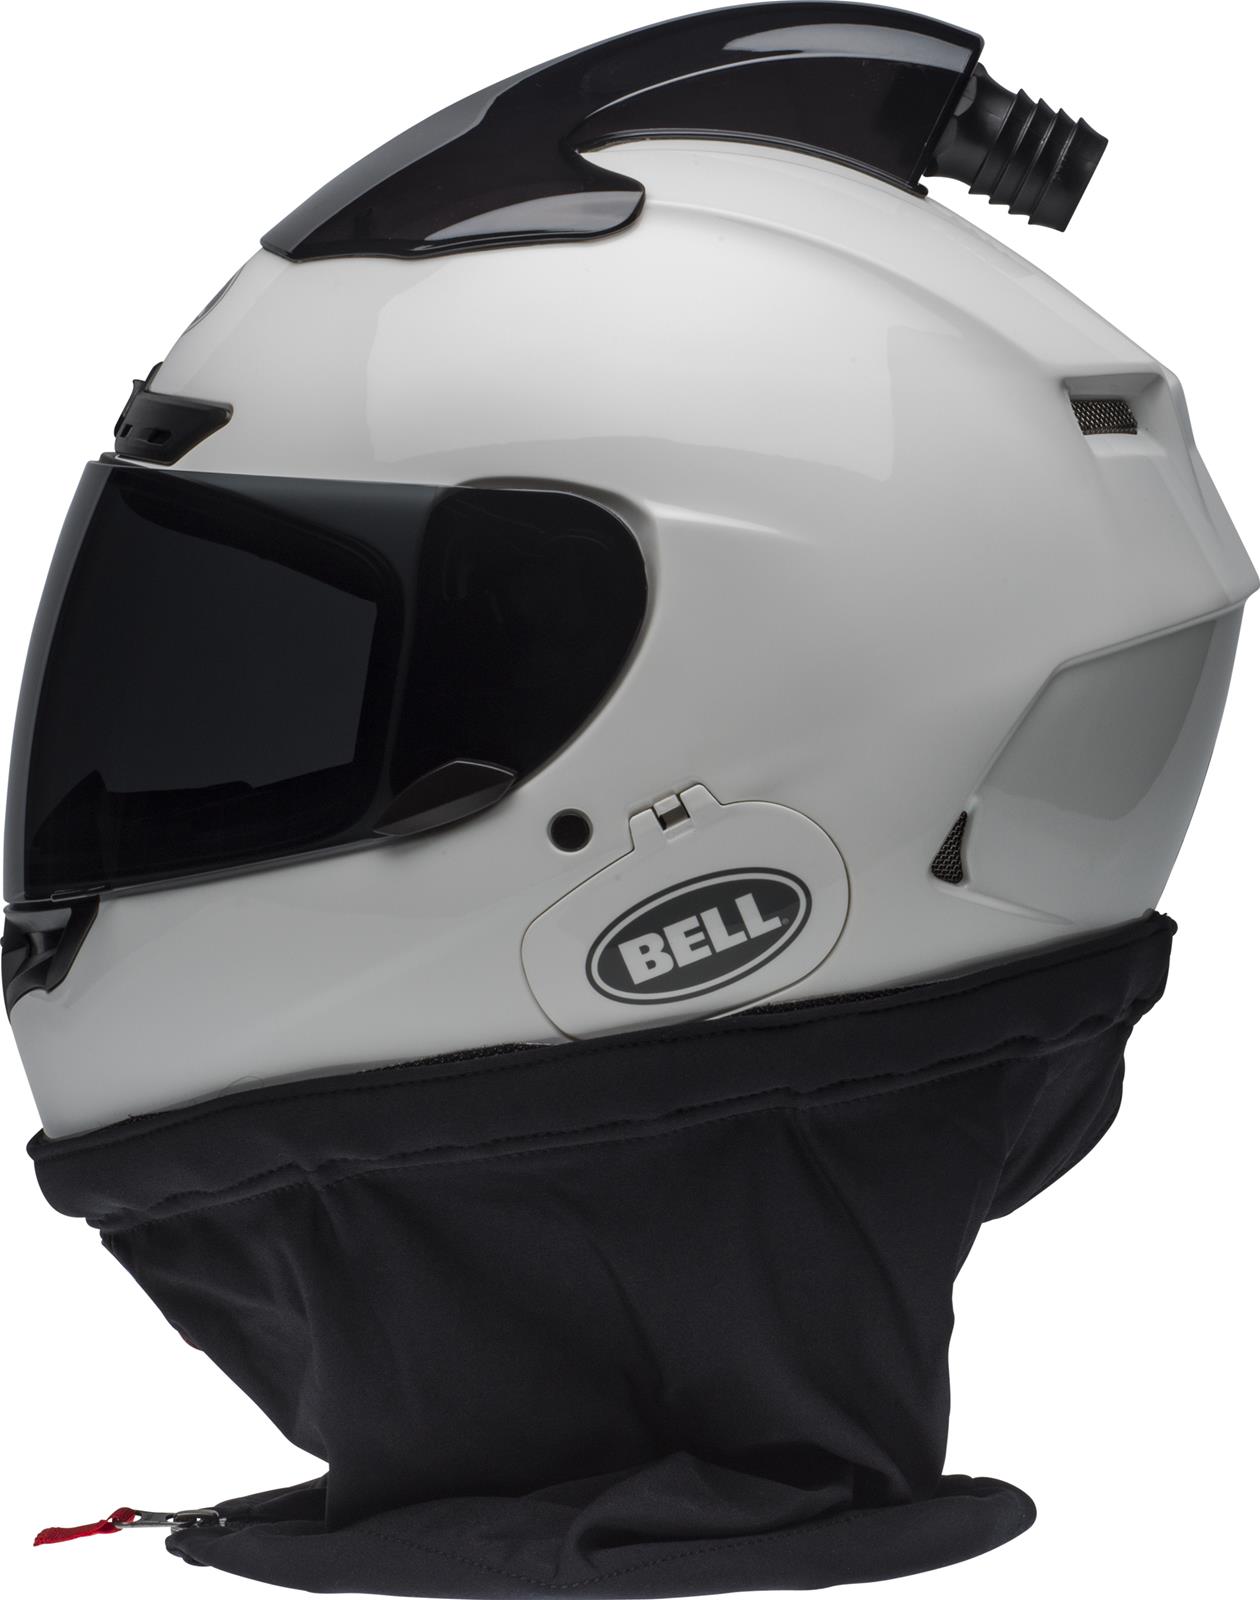 Bell Motorcycle Helmets 7095746 Bell Qualifier DLX Forced Air Helmets